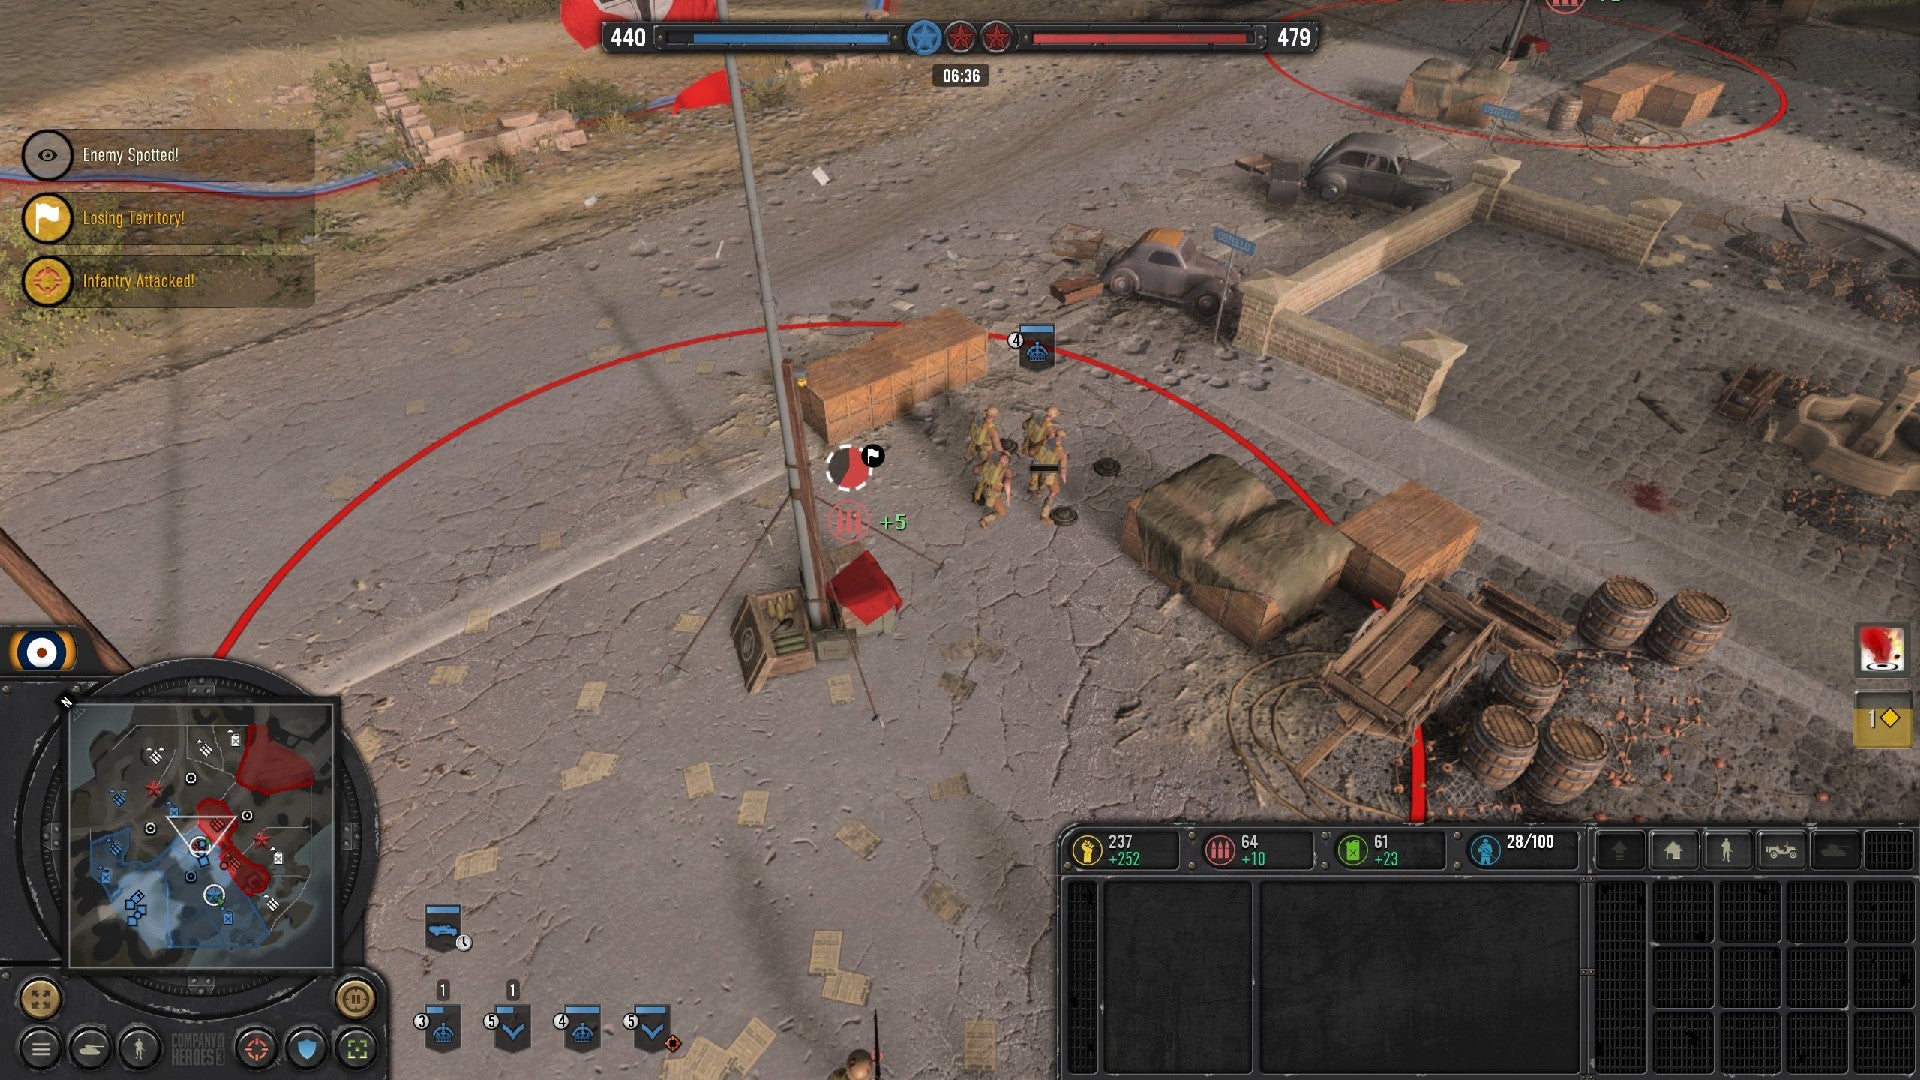 Company of Heroes 3 image showing an Engineer unit capturing a position while placing mines.